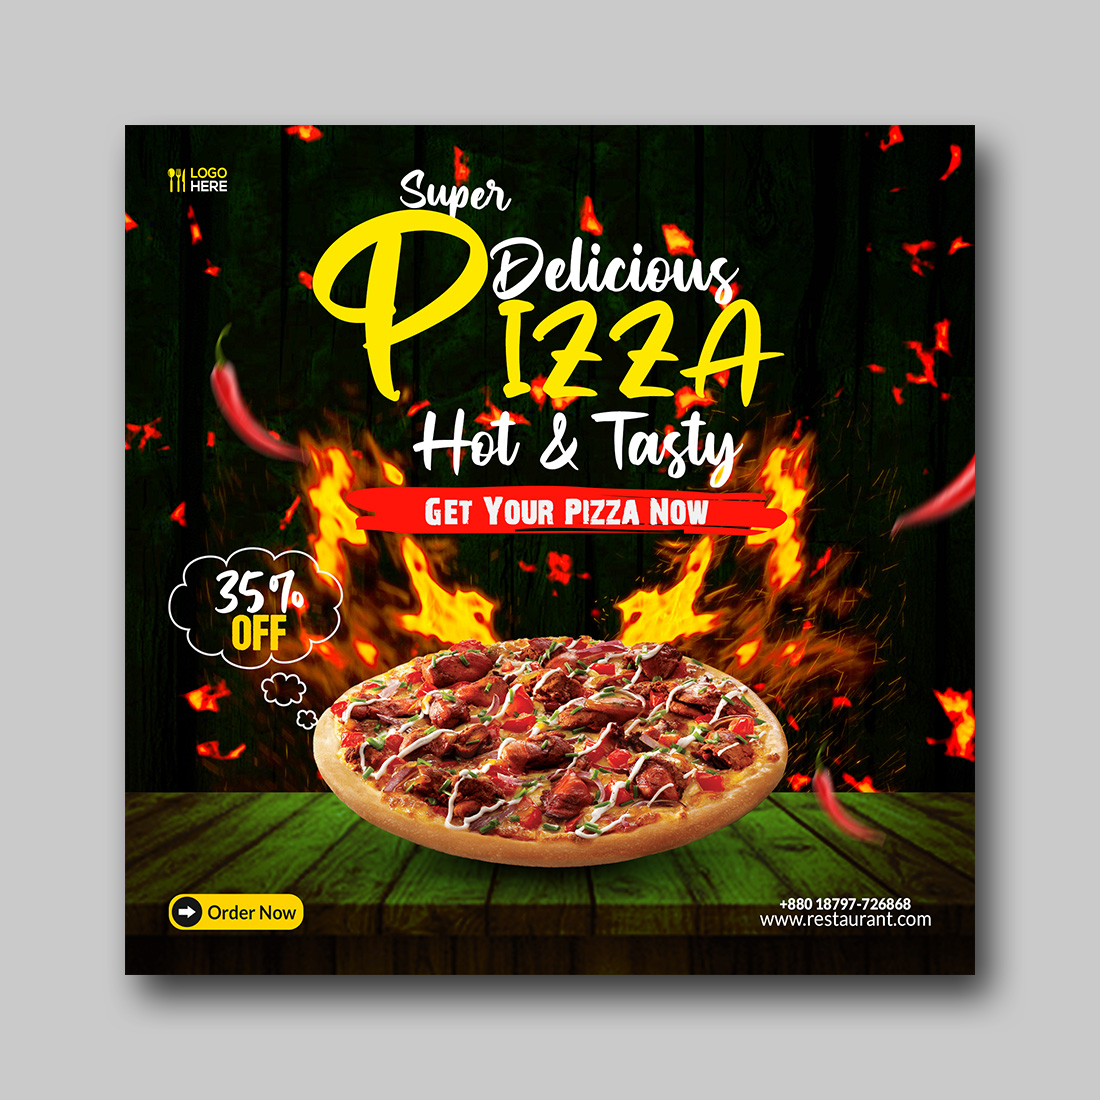 Spicy Pizza Font - Download Free Font